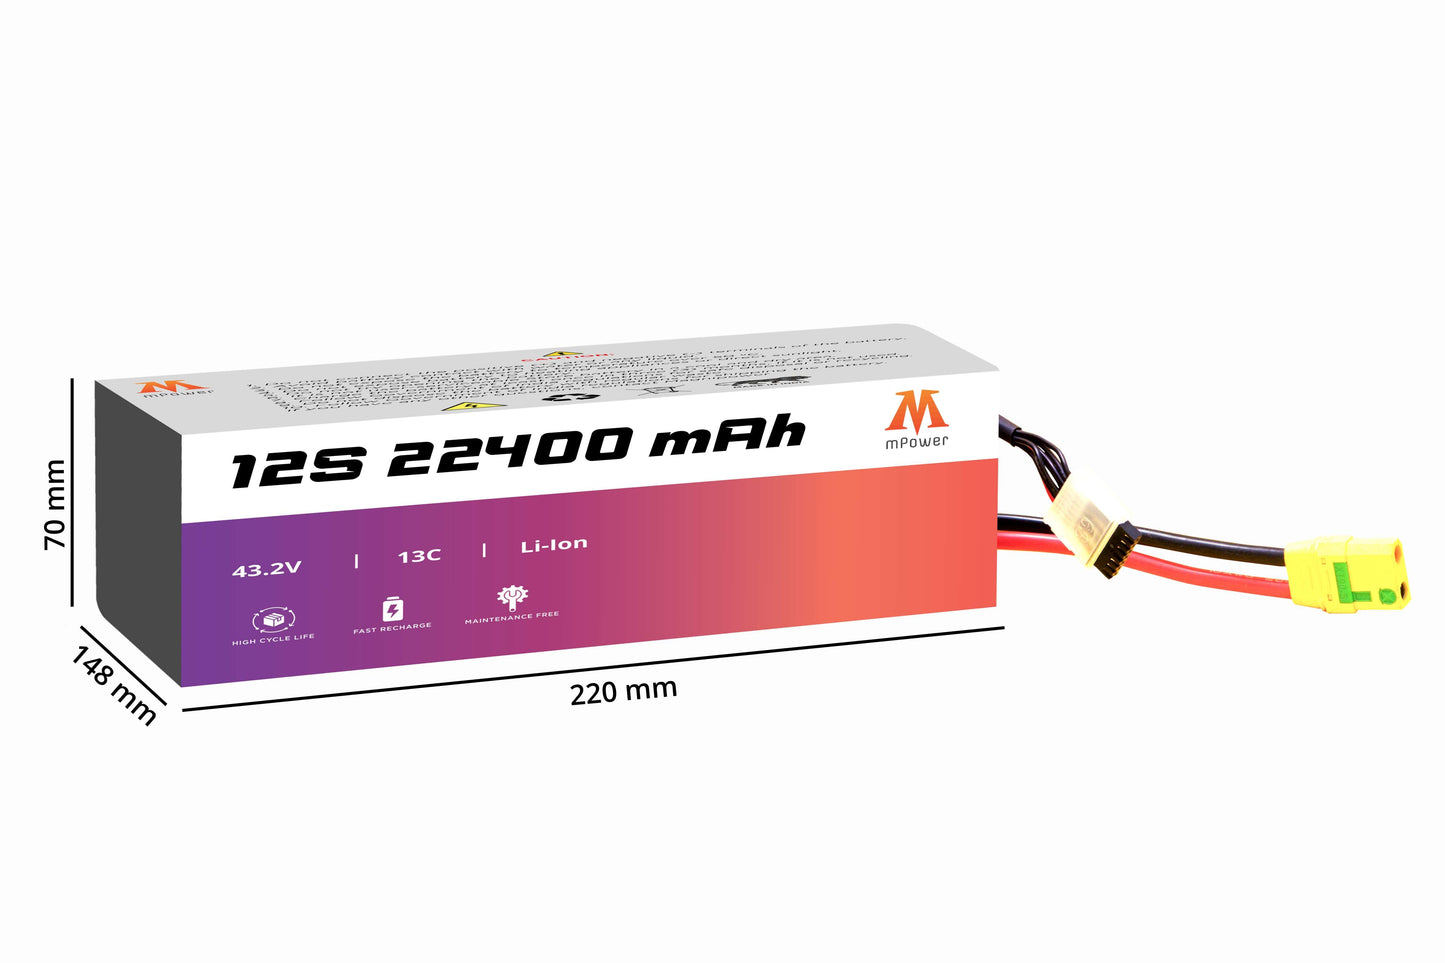 mPower 12S 22400mAh Lithium-Ion Battery for Survey Drones